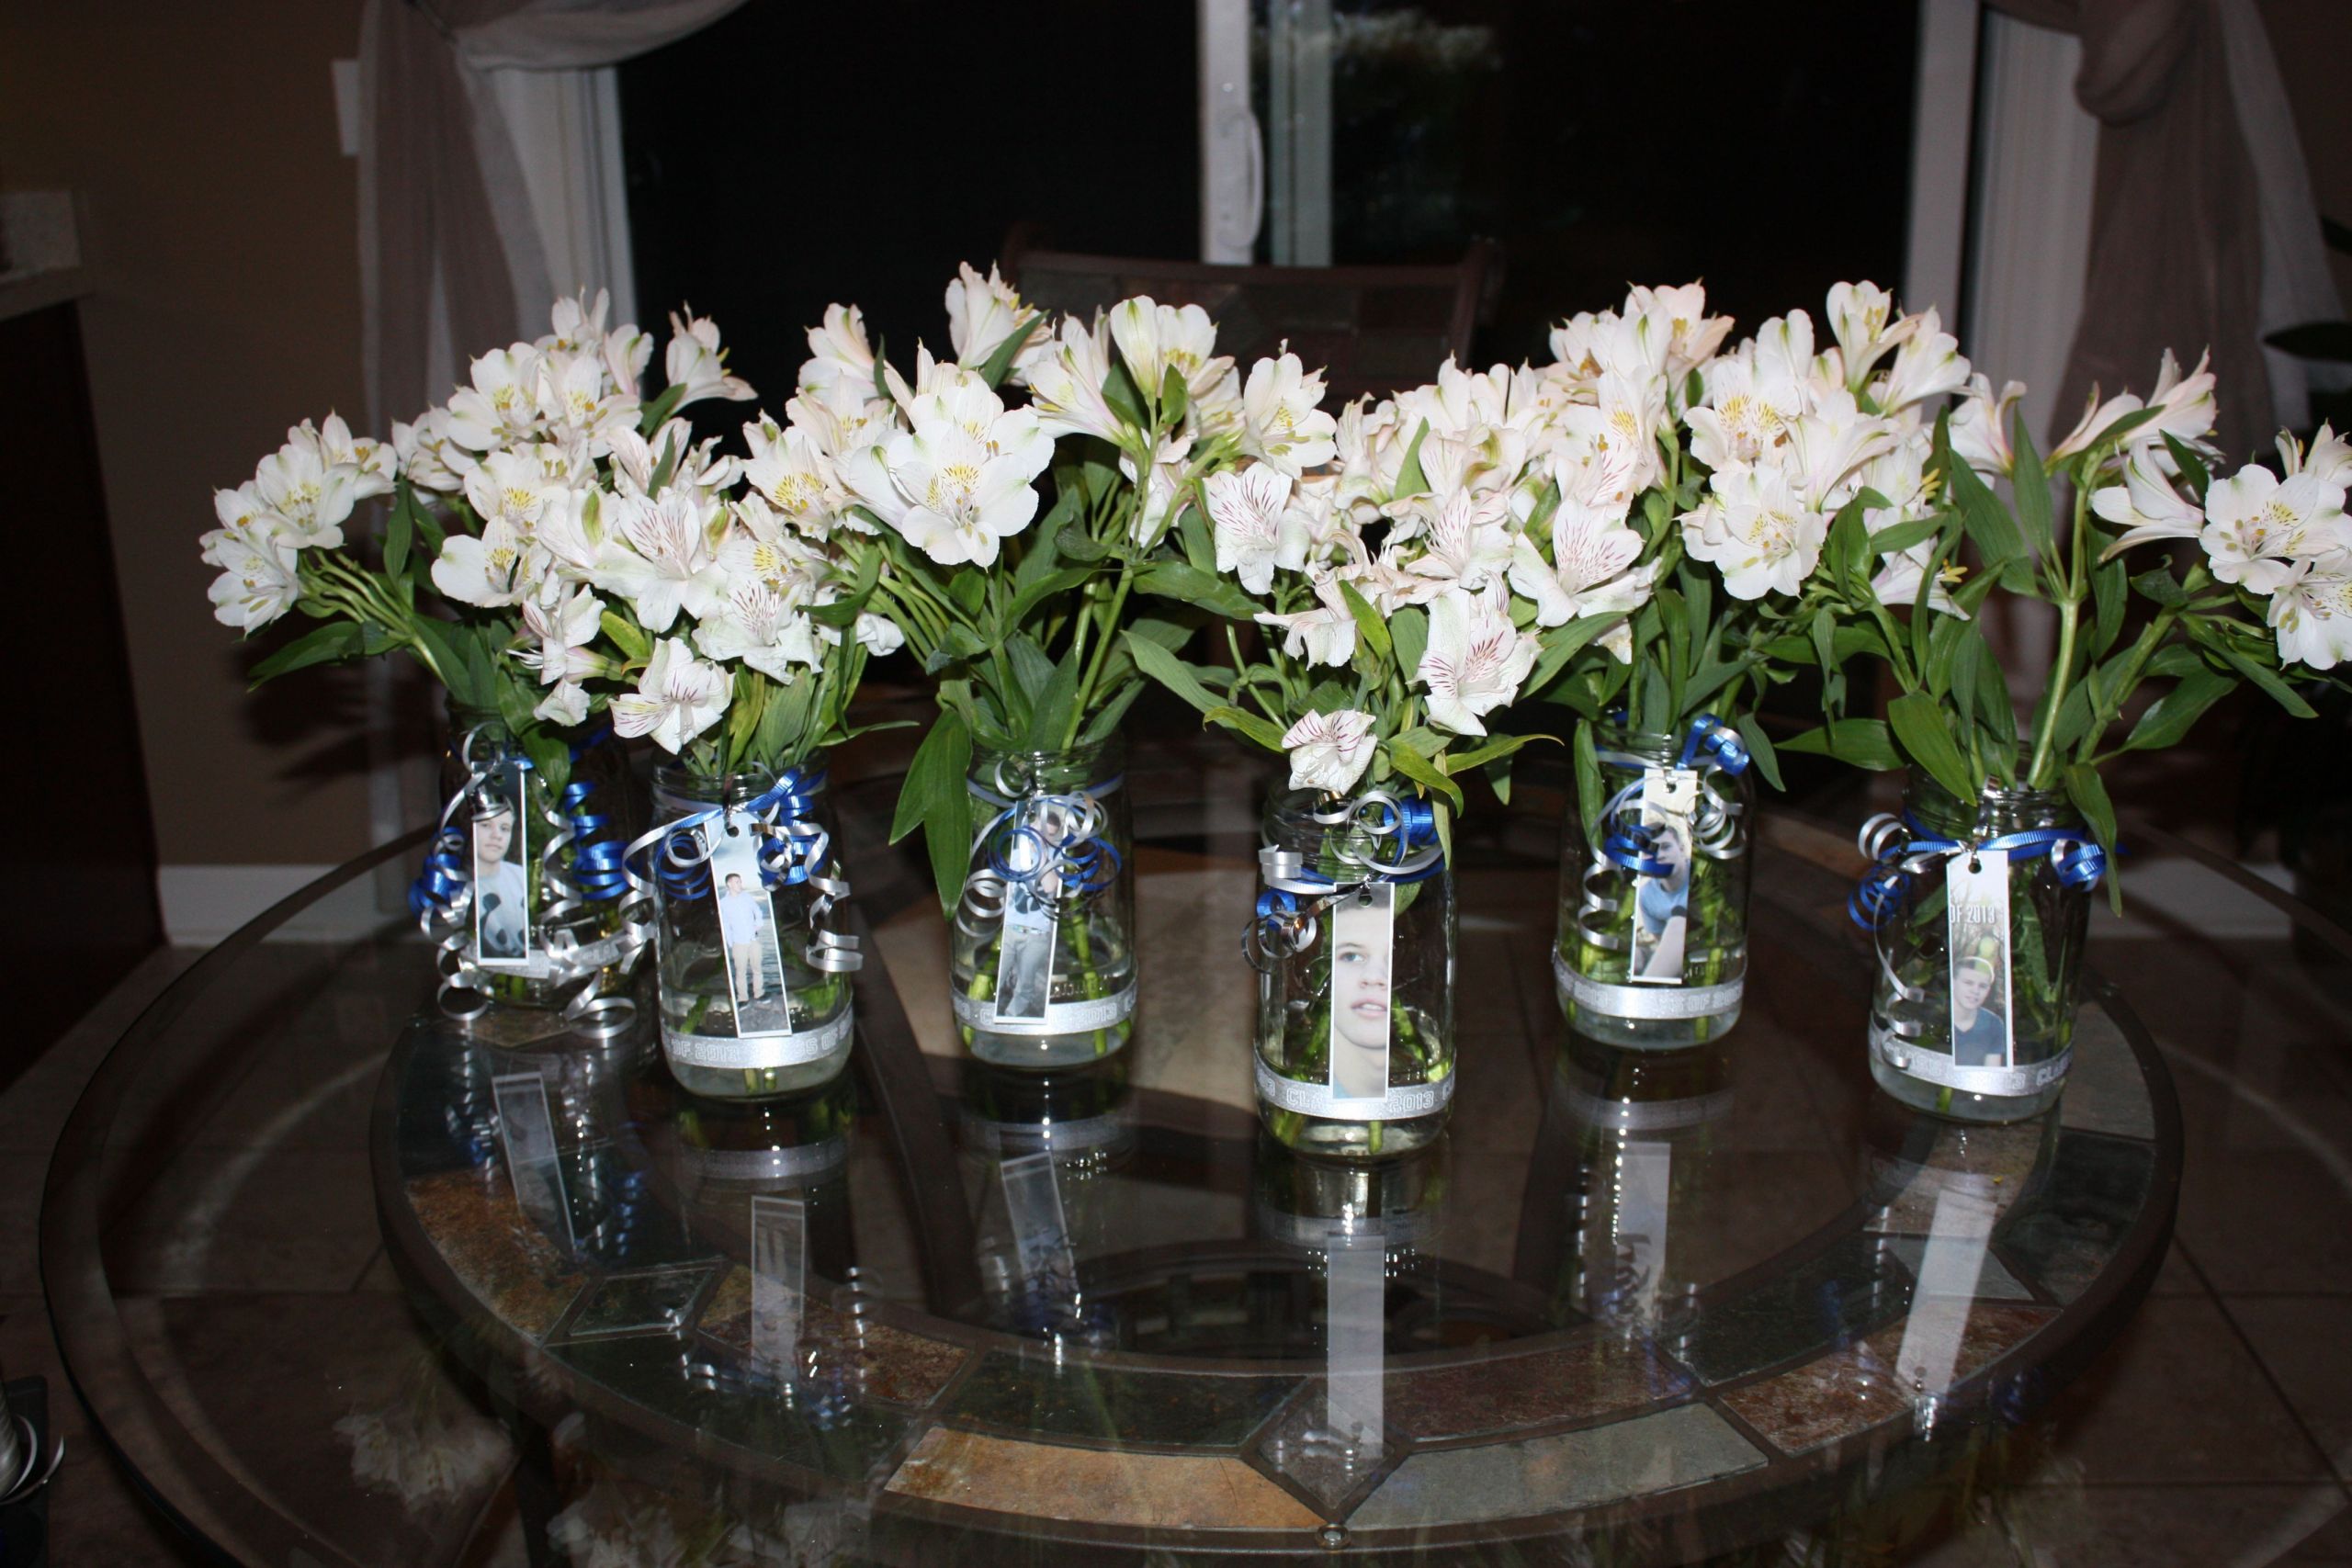 Easy Centerpiece Ideas For Graduation Party
 Table Centerpieces Glass Ball Jars white flowers blue